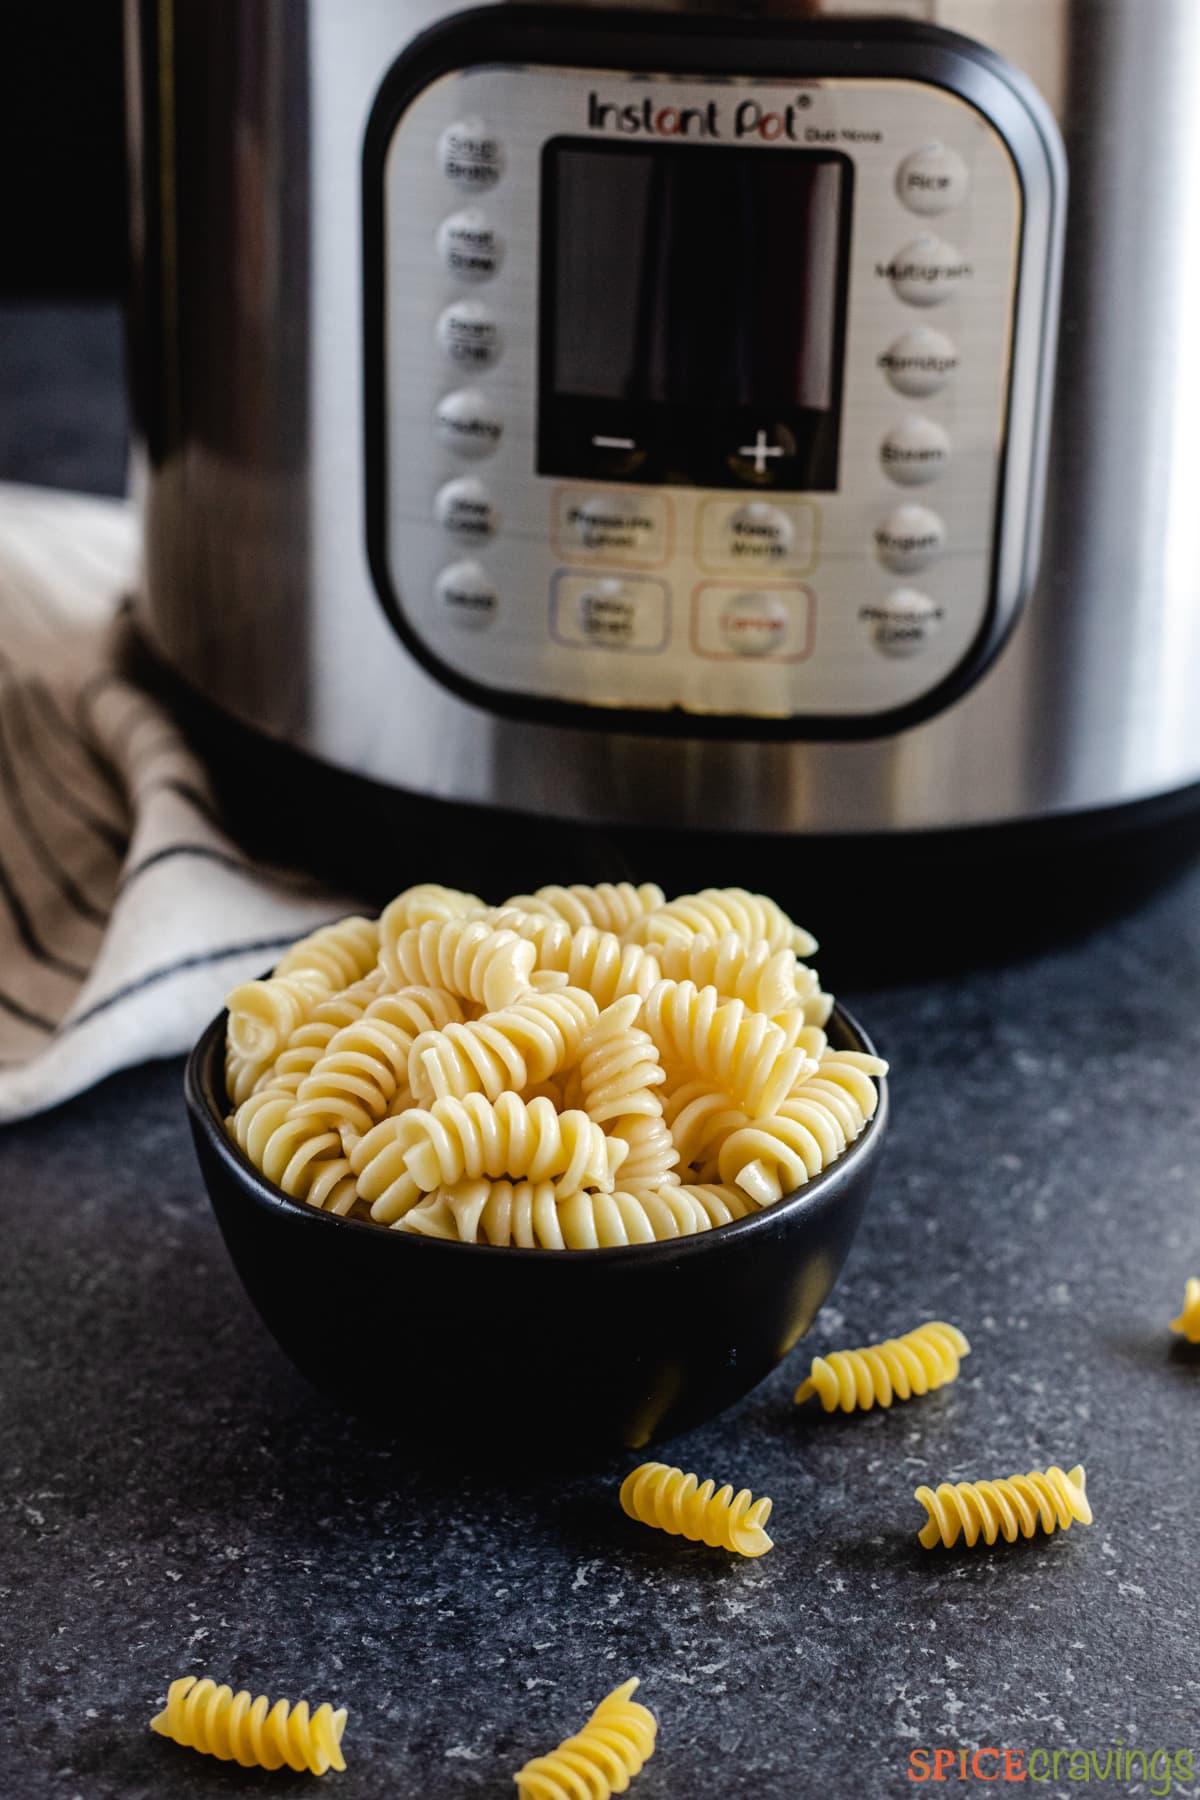 A bowl of rotini pasta next to an Instant Pot